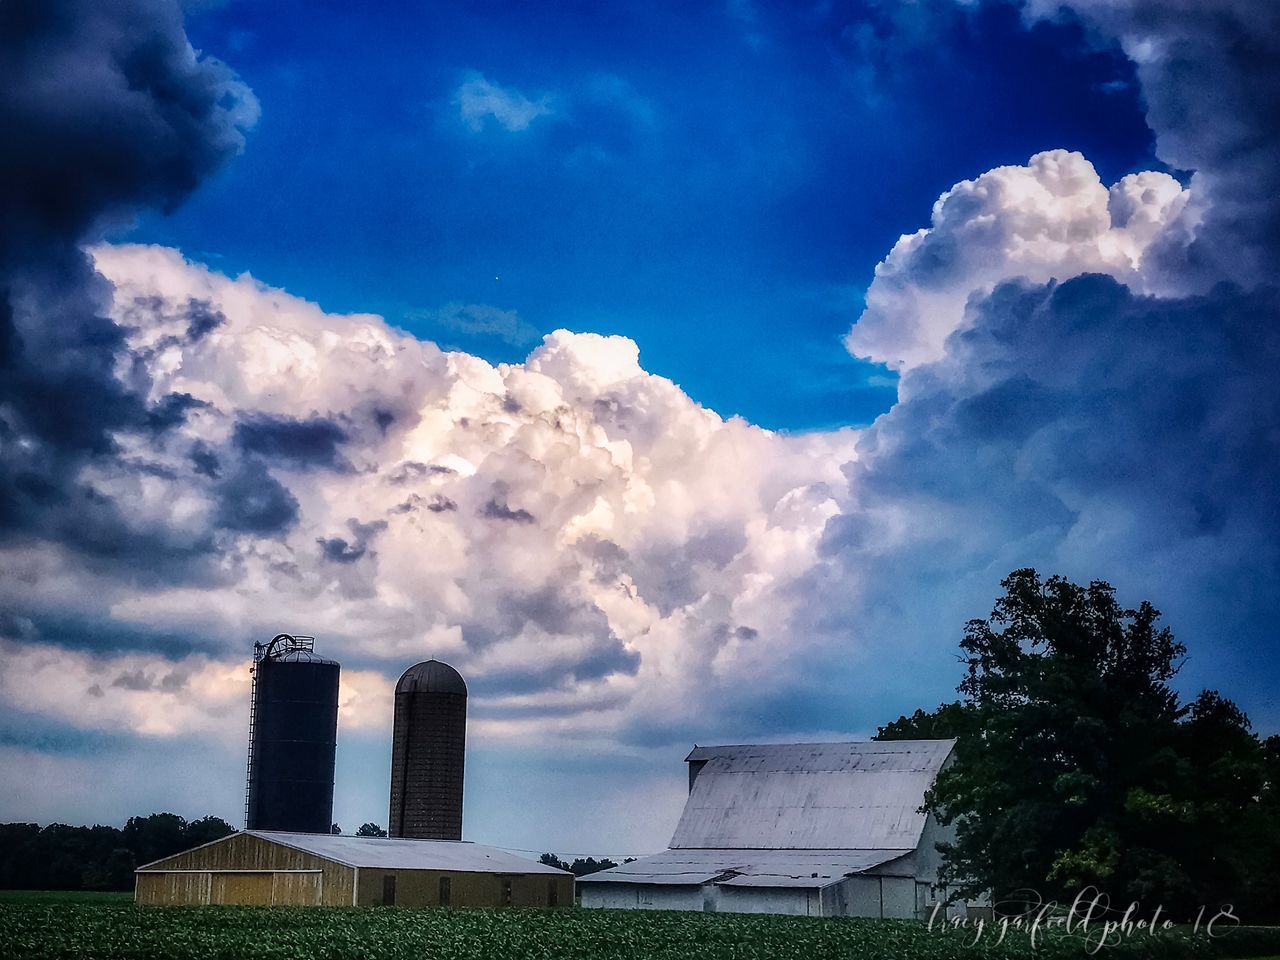 cloud - sky, sky, architecture, built structure, building exterior, plant, nature, day, no people, factory, industry, outdoors, low angle view, building, tree, silo, tall - high, tower, smoke stack, landscape, pollution